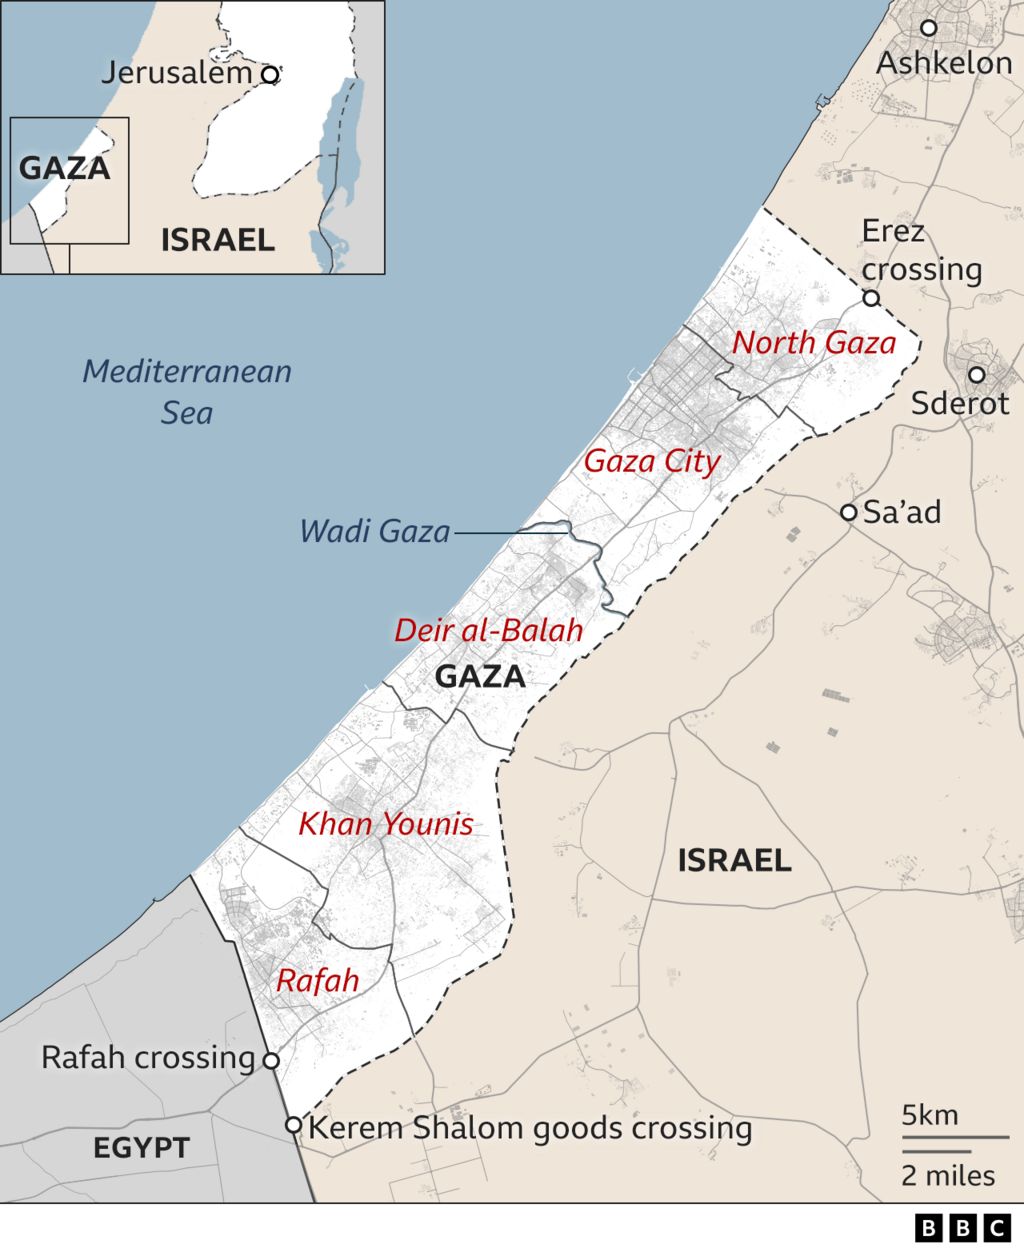 Map of Gaza showing various parts of the strip including Gaza City and Rafah